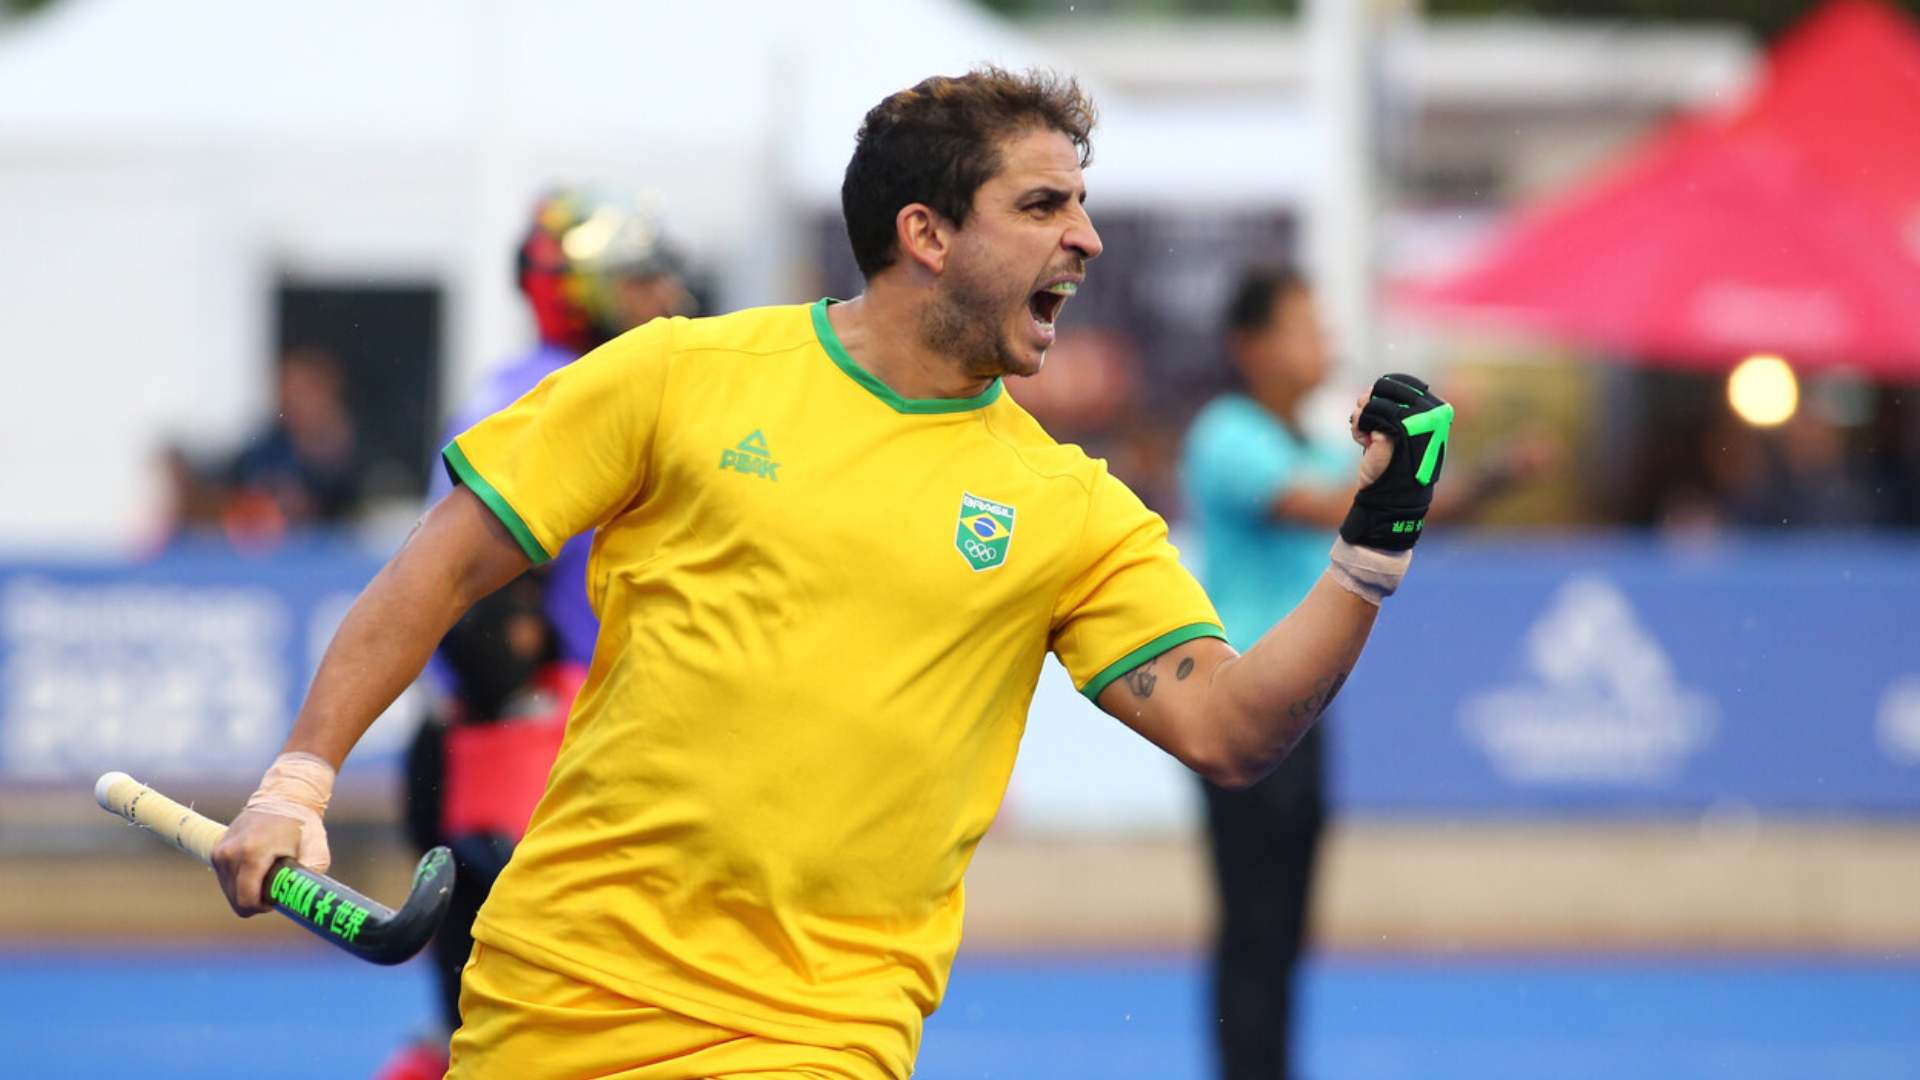 Brazil defeated Peru and will compete for the fifth spot in male's field hockey.